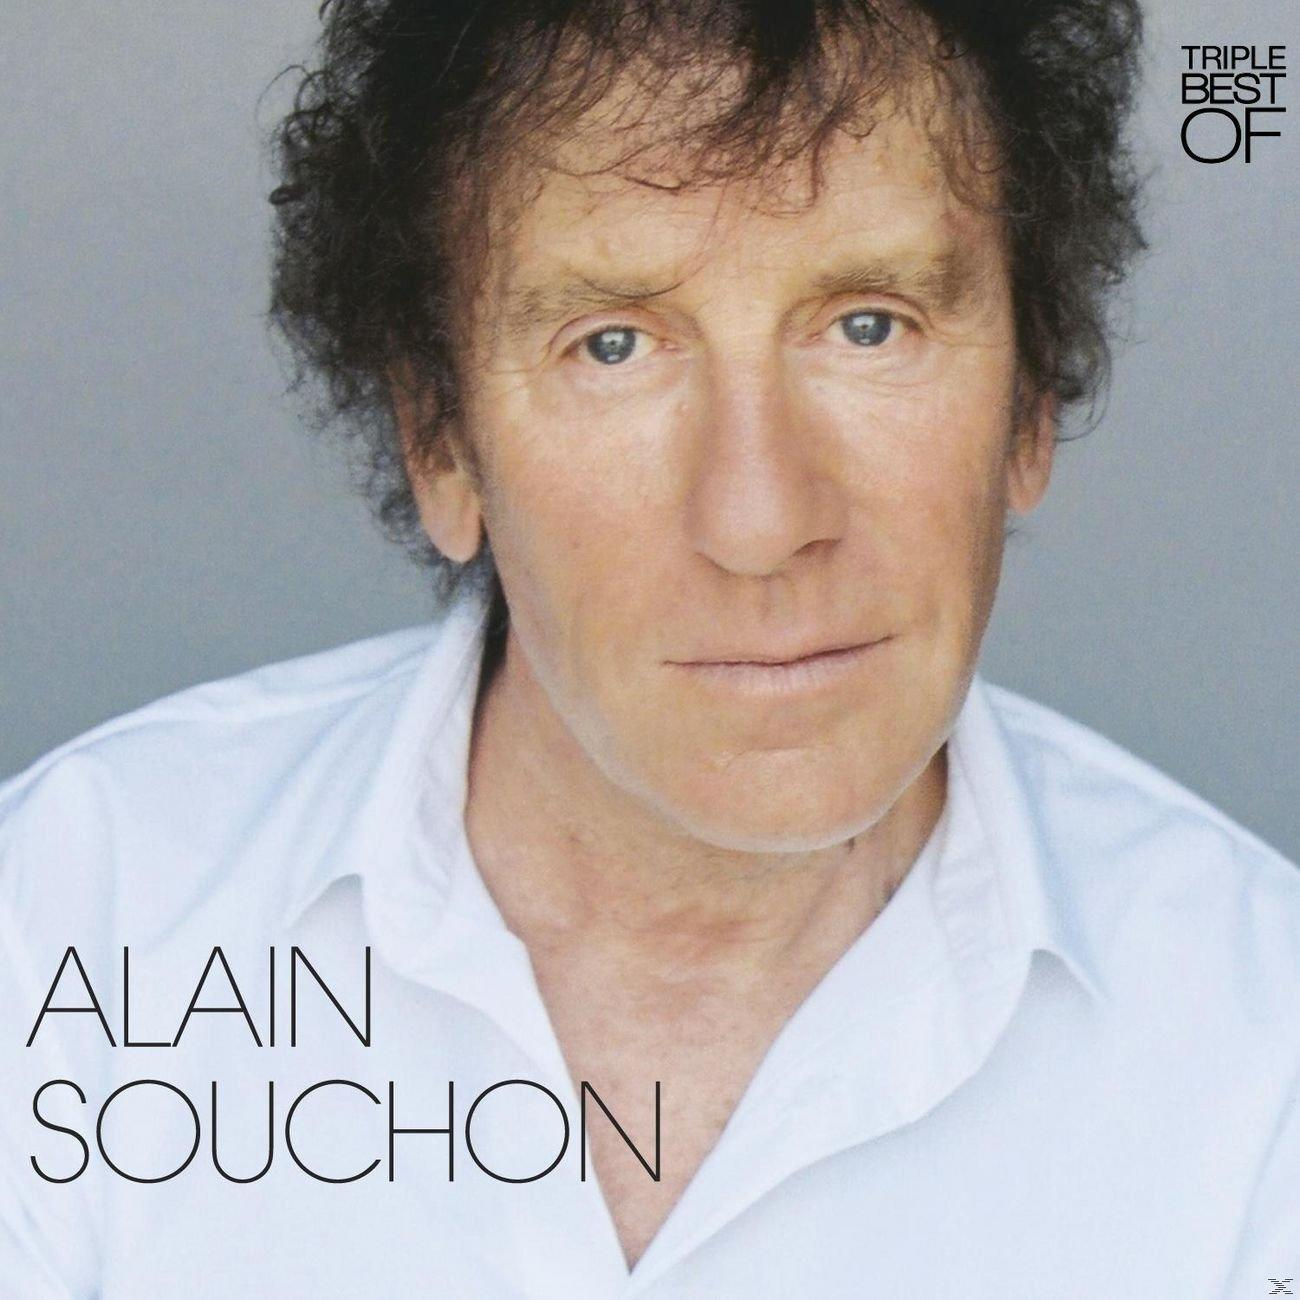 Digipack Best-Of Collection) - - Souchon (CD) 3cd (New Alain